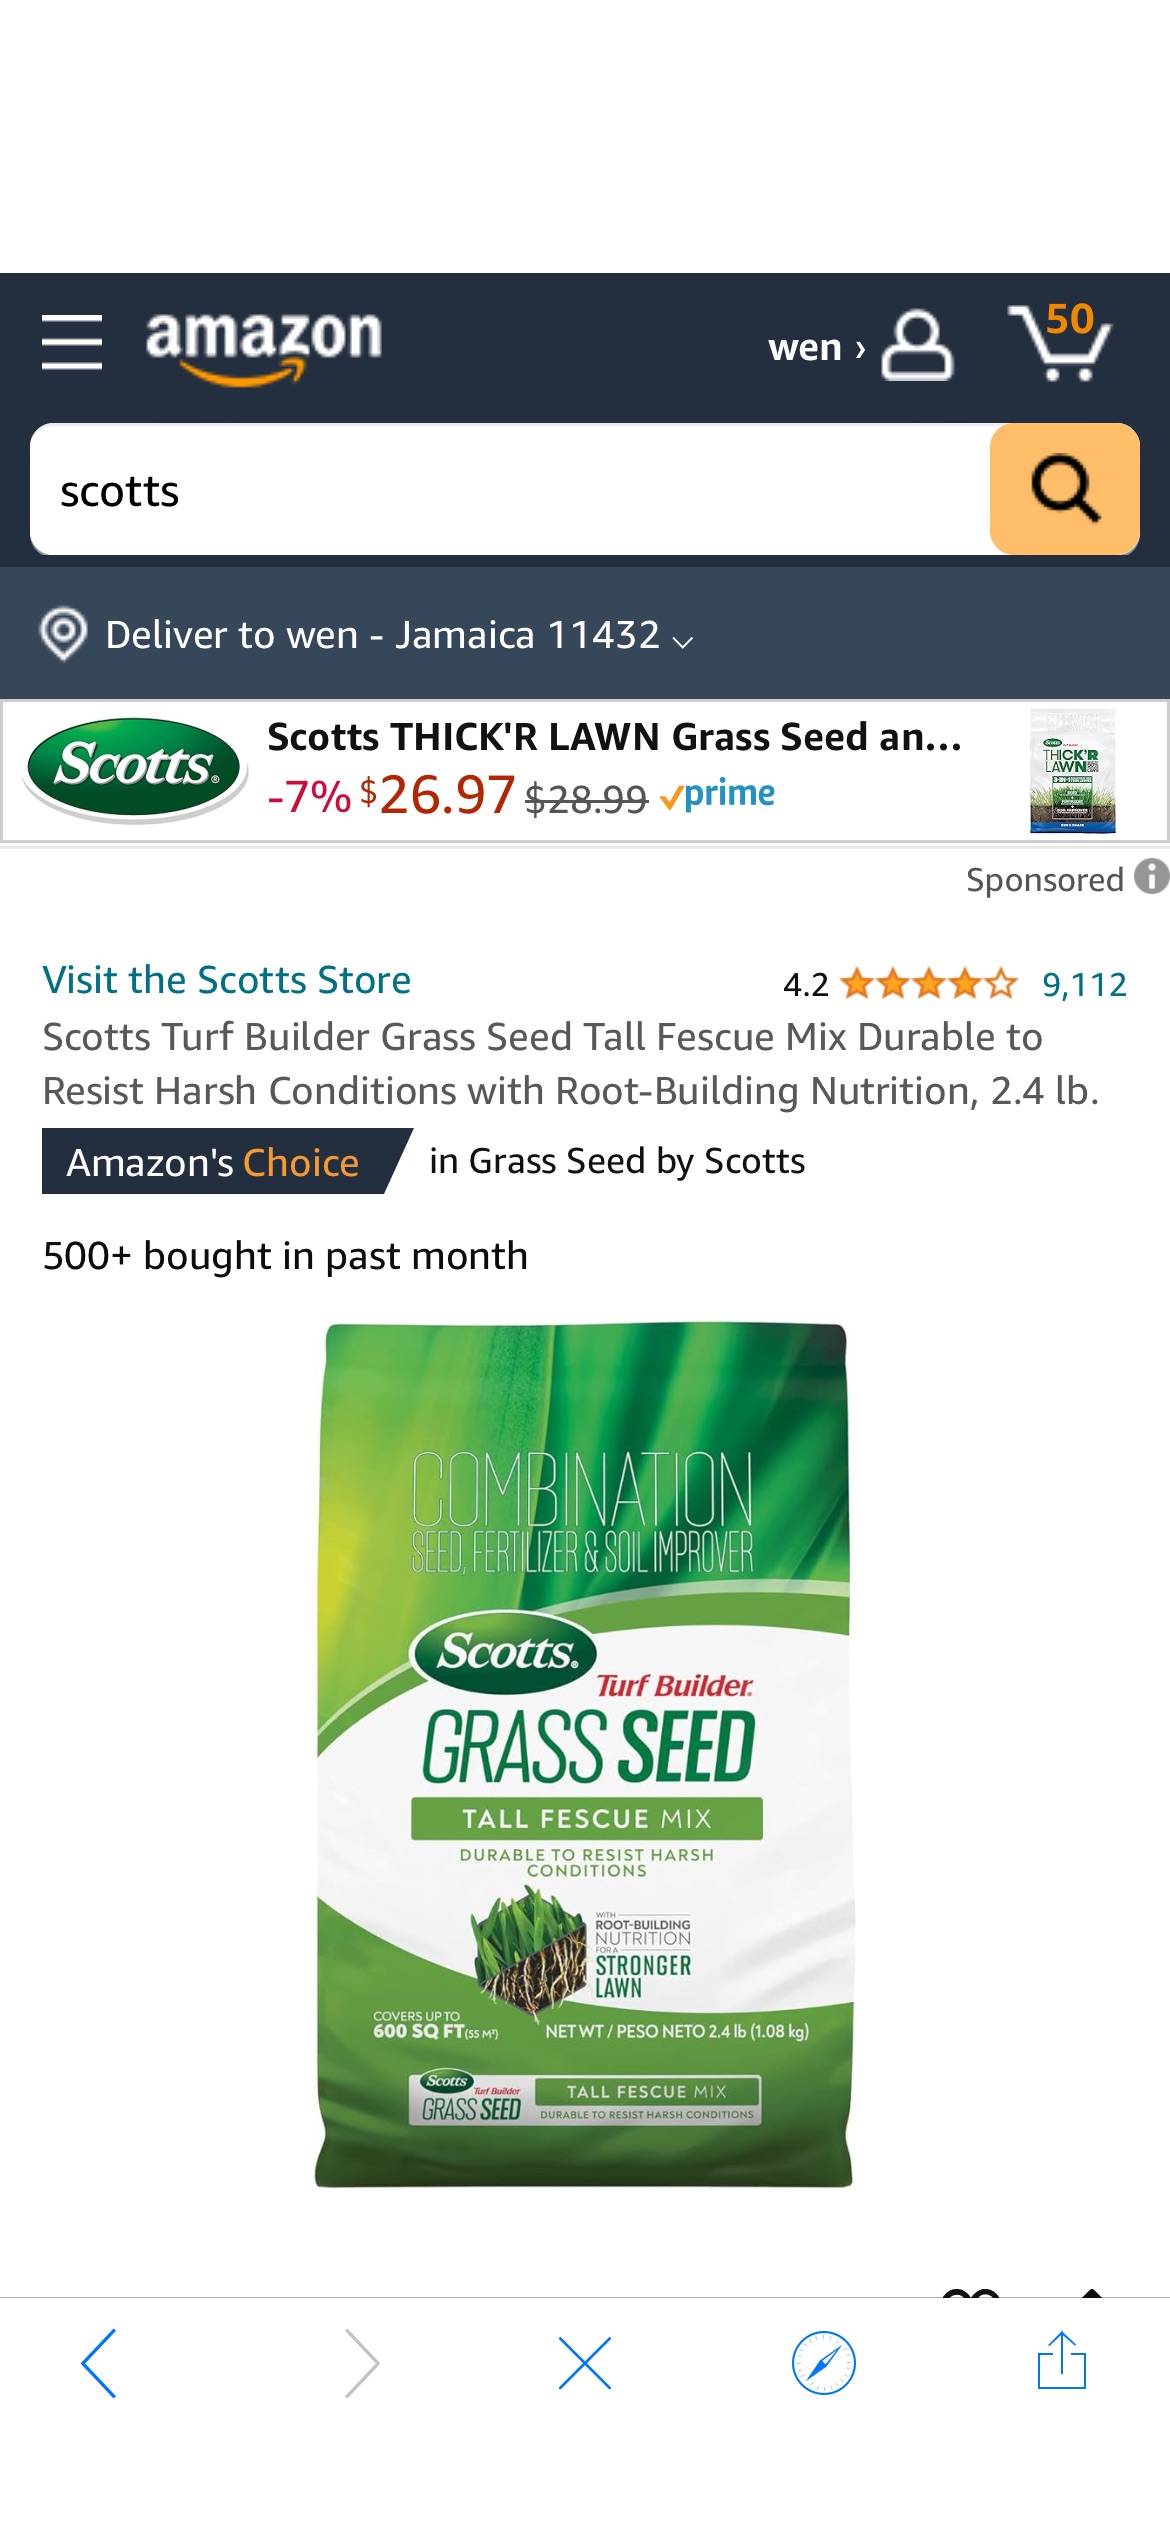 Amazon.com : Scotts Turf Builder Grass Seed Tall Fescue Mix Durable to Resist Harsh Conditions with Root-Building Nutrition, 2.4 lb. : Patio, Lawn & Garden